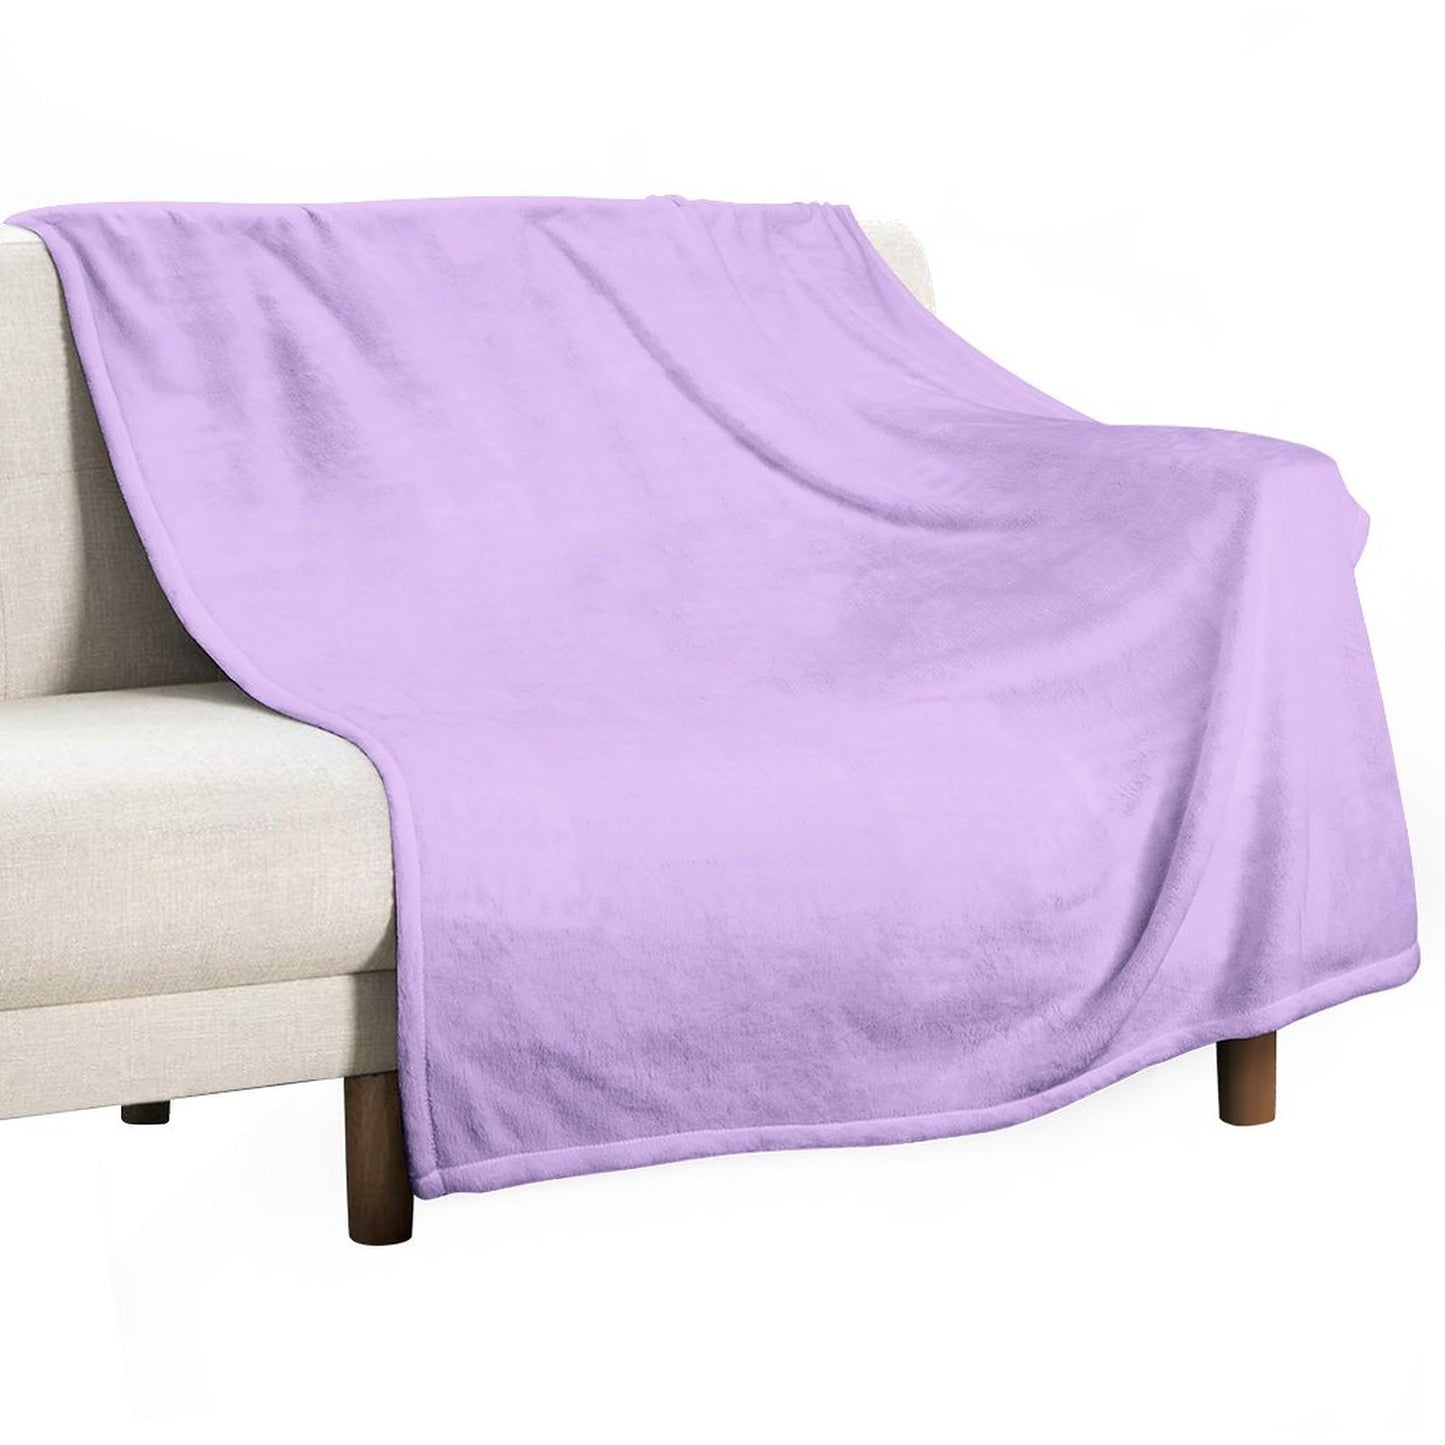 Create Your Own 280gsm Soft Flannel Fleece Blanket-Dual-sided Printing-Various Sizes